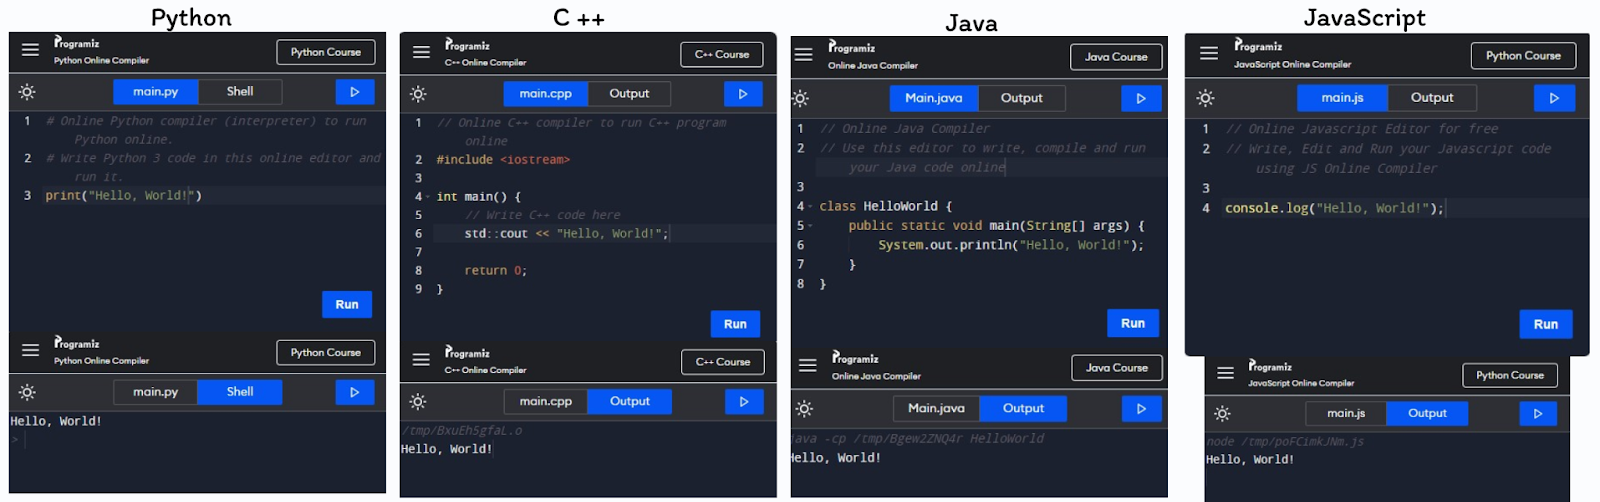 Comparing the syntax of different programming languages using the ProgramWhiz online compiler